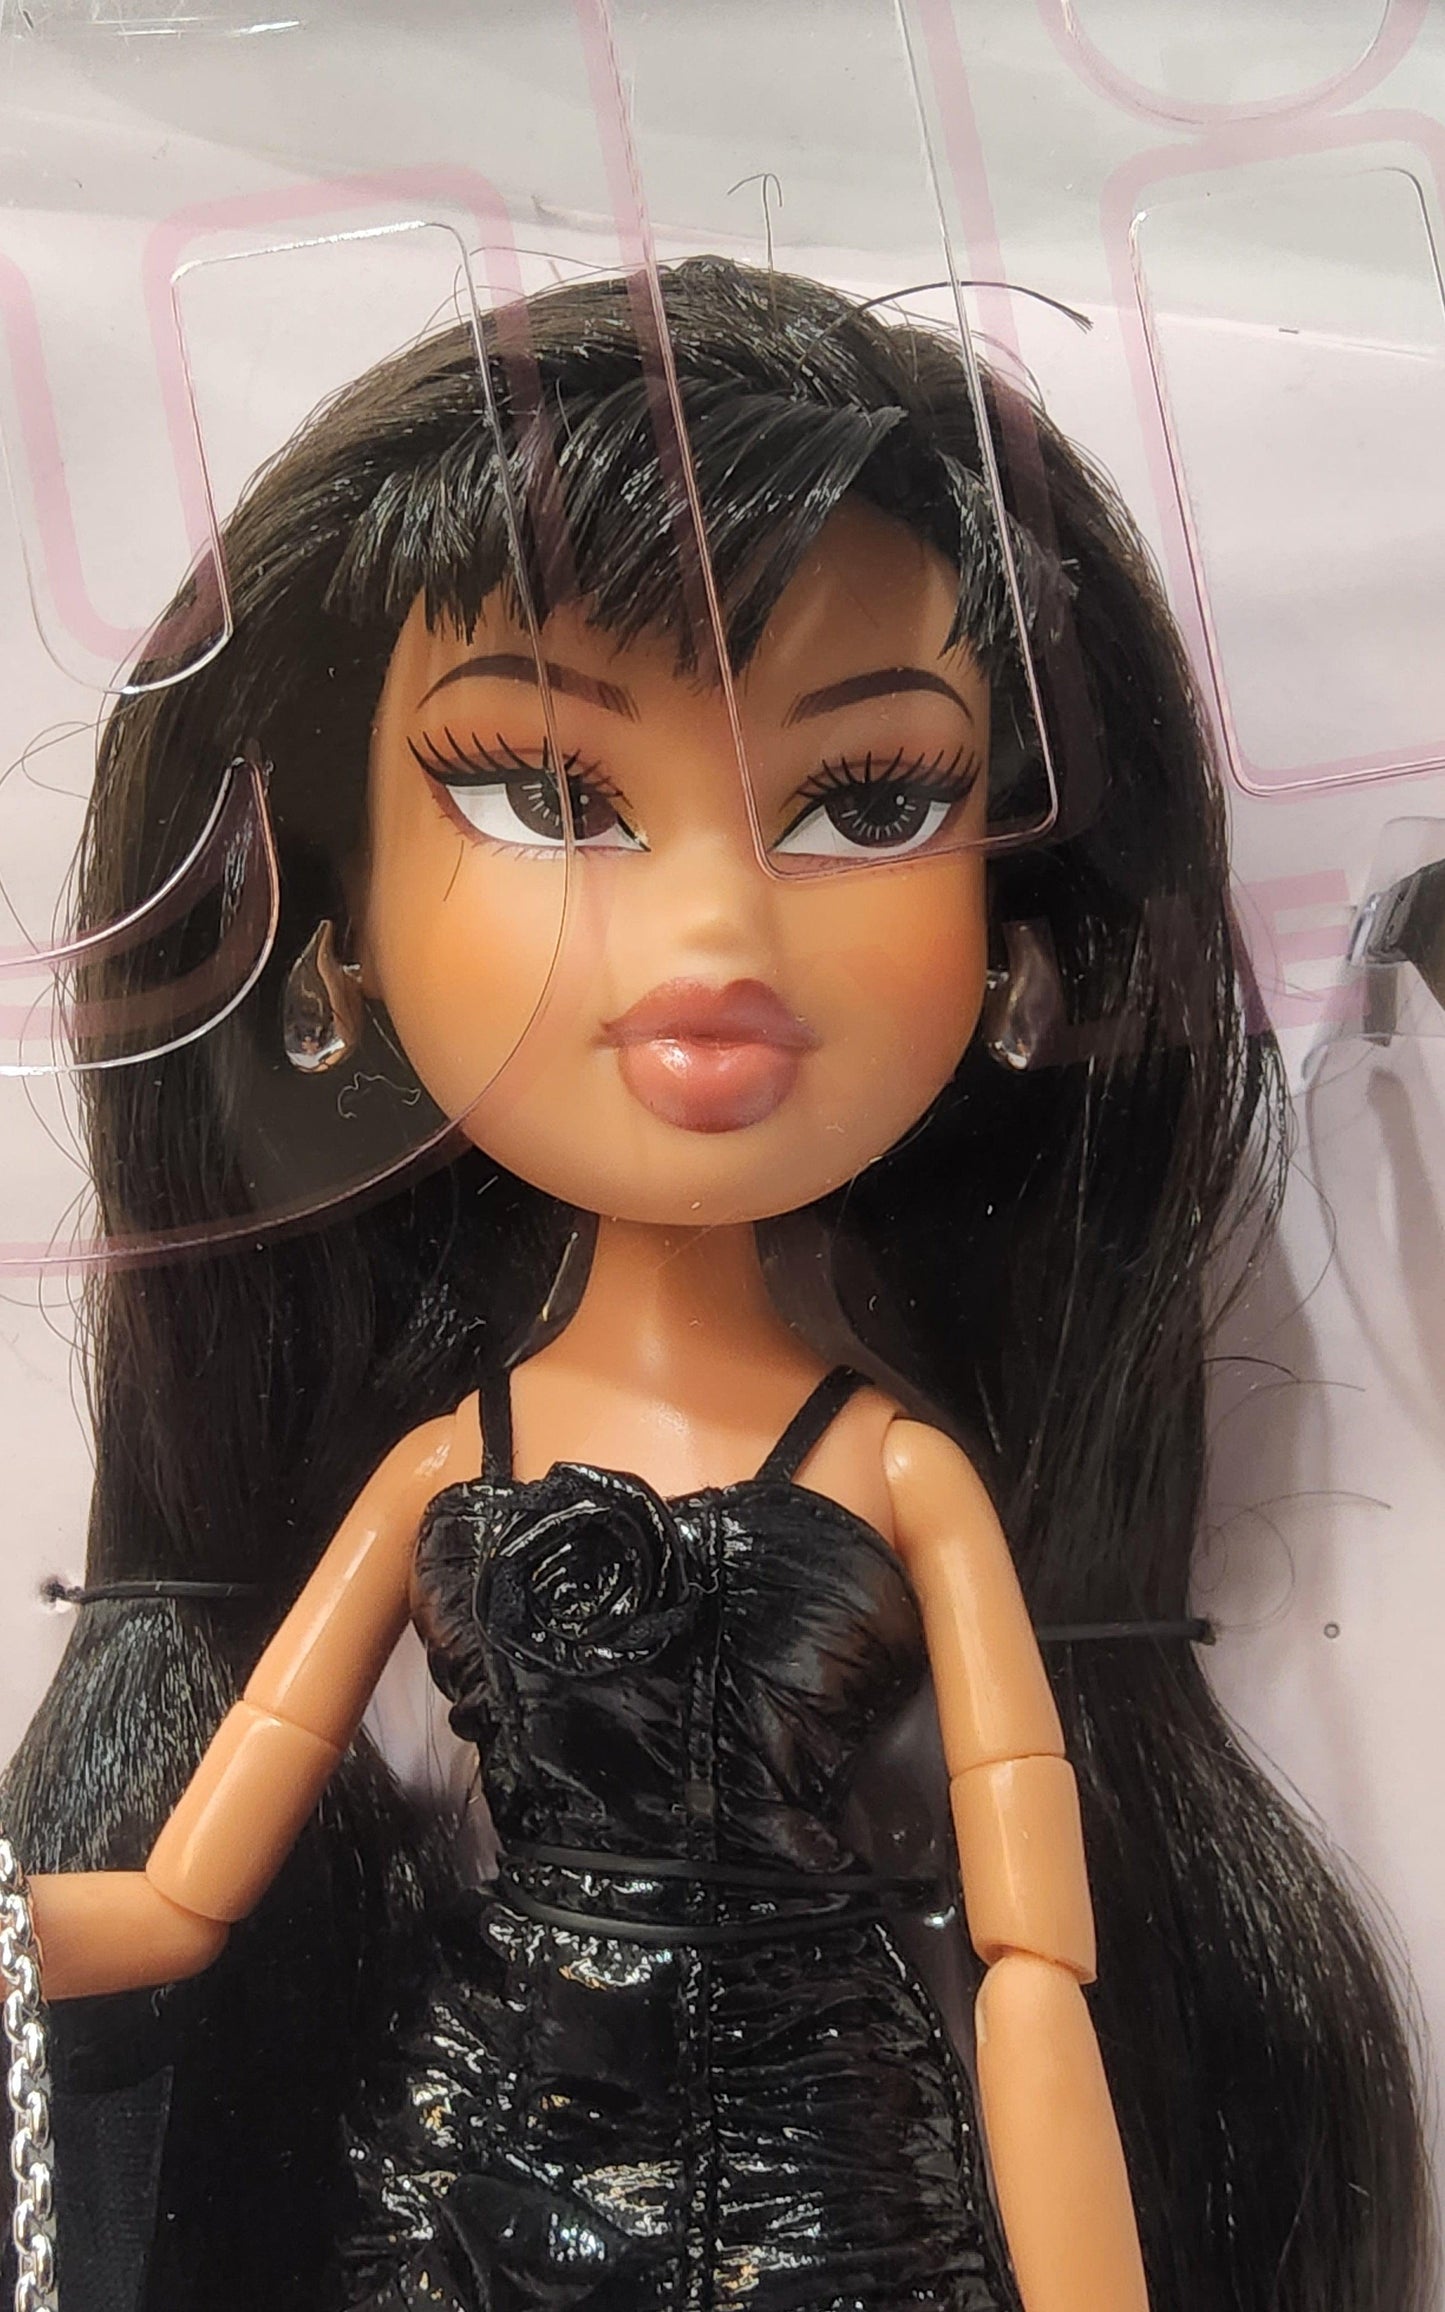 Bratz Kylie Jenner Day Fashion Doll Accessories & Certificate of Authenticity - Logan's Toy Chest